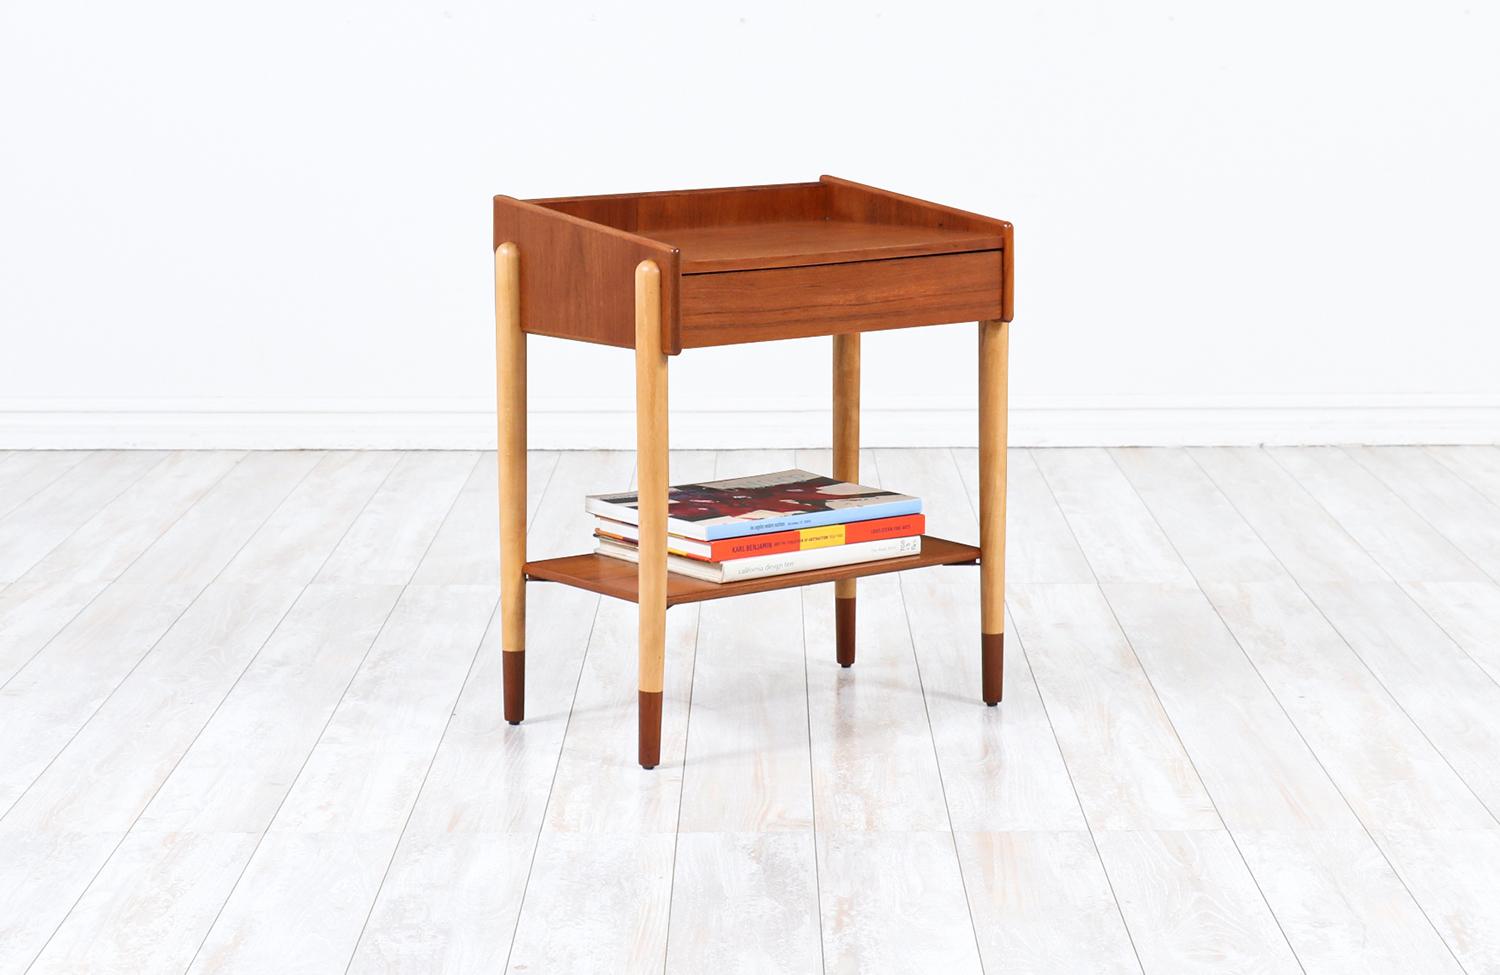 Børge Mogensen teak & oak night stand for Søborg Møbler.

________________________________________

Transforming a piece of Mid-Century Modern furniture is like bringing history back to life, and we take this journey with passion and precision. With